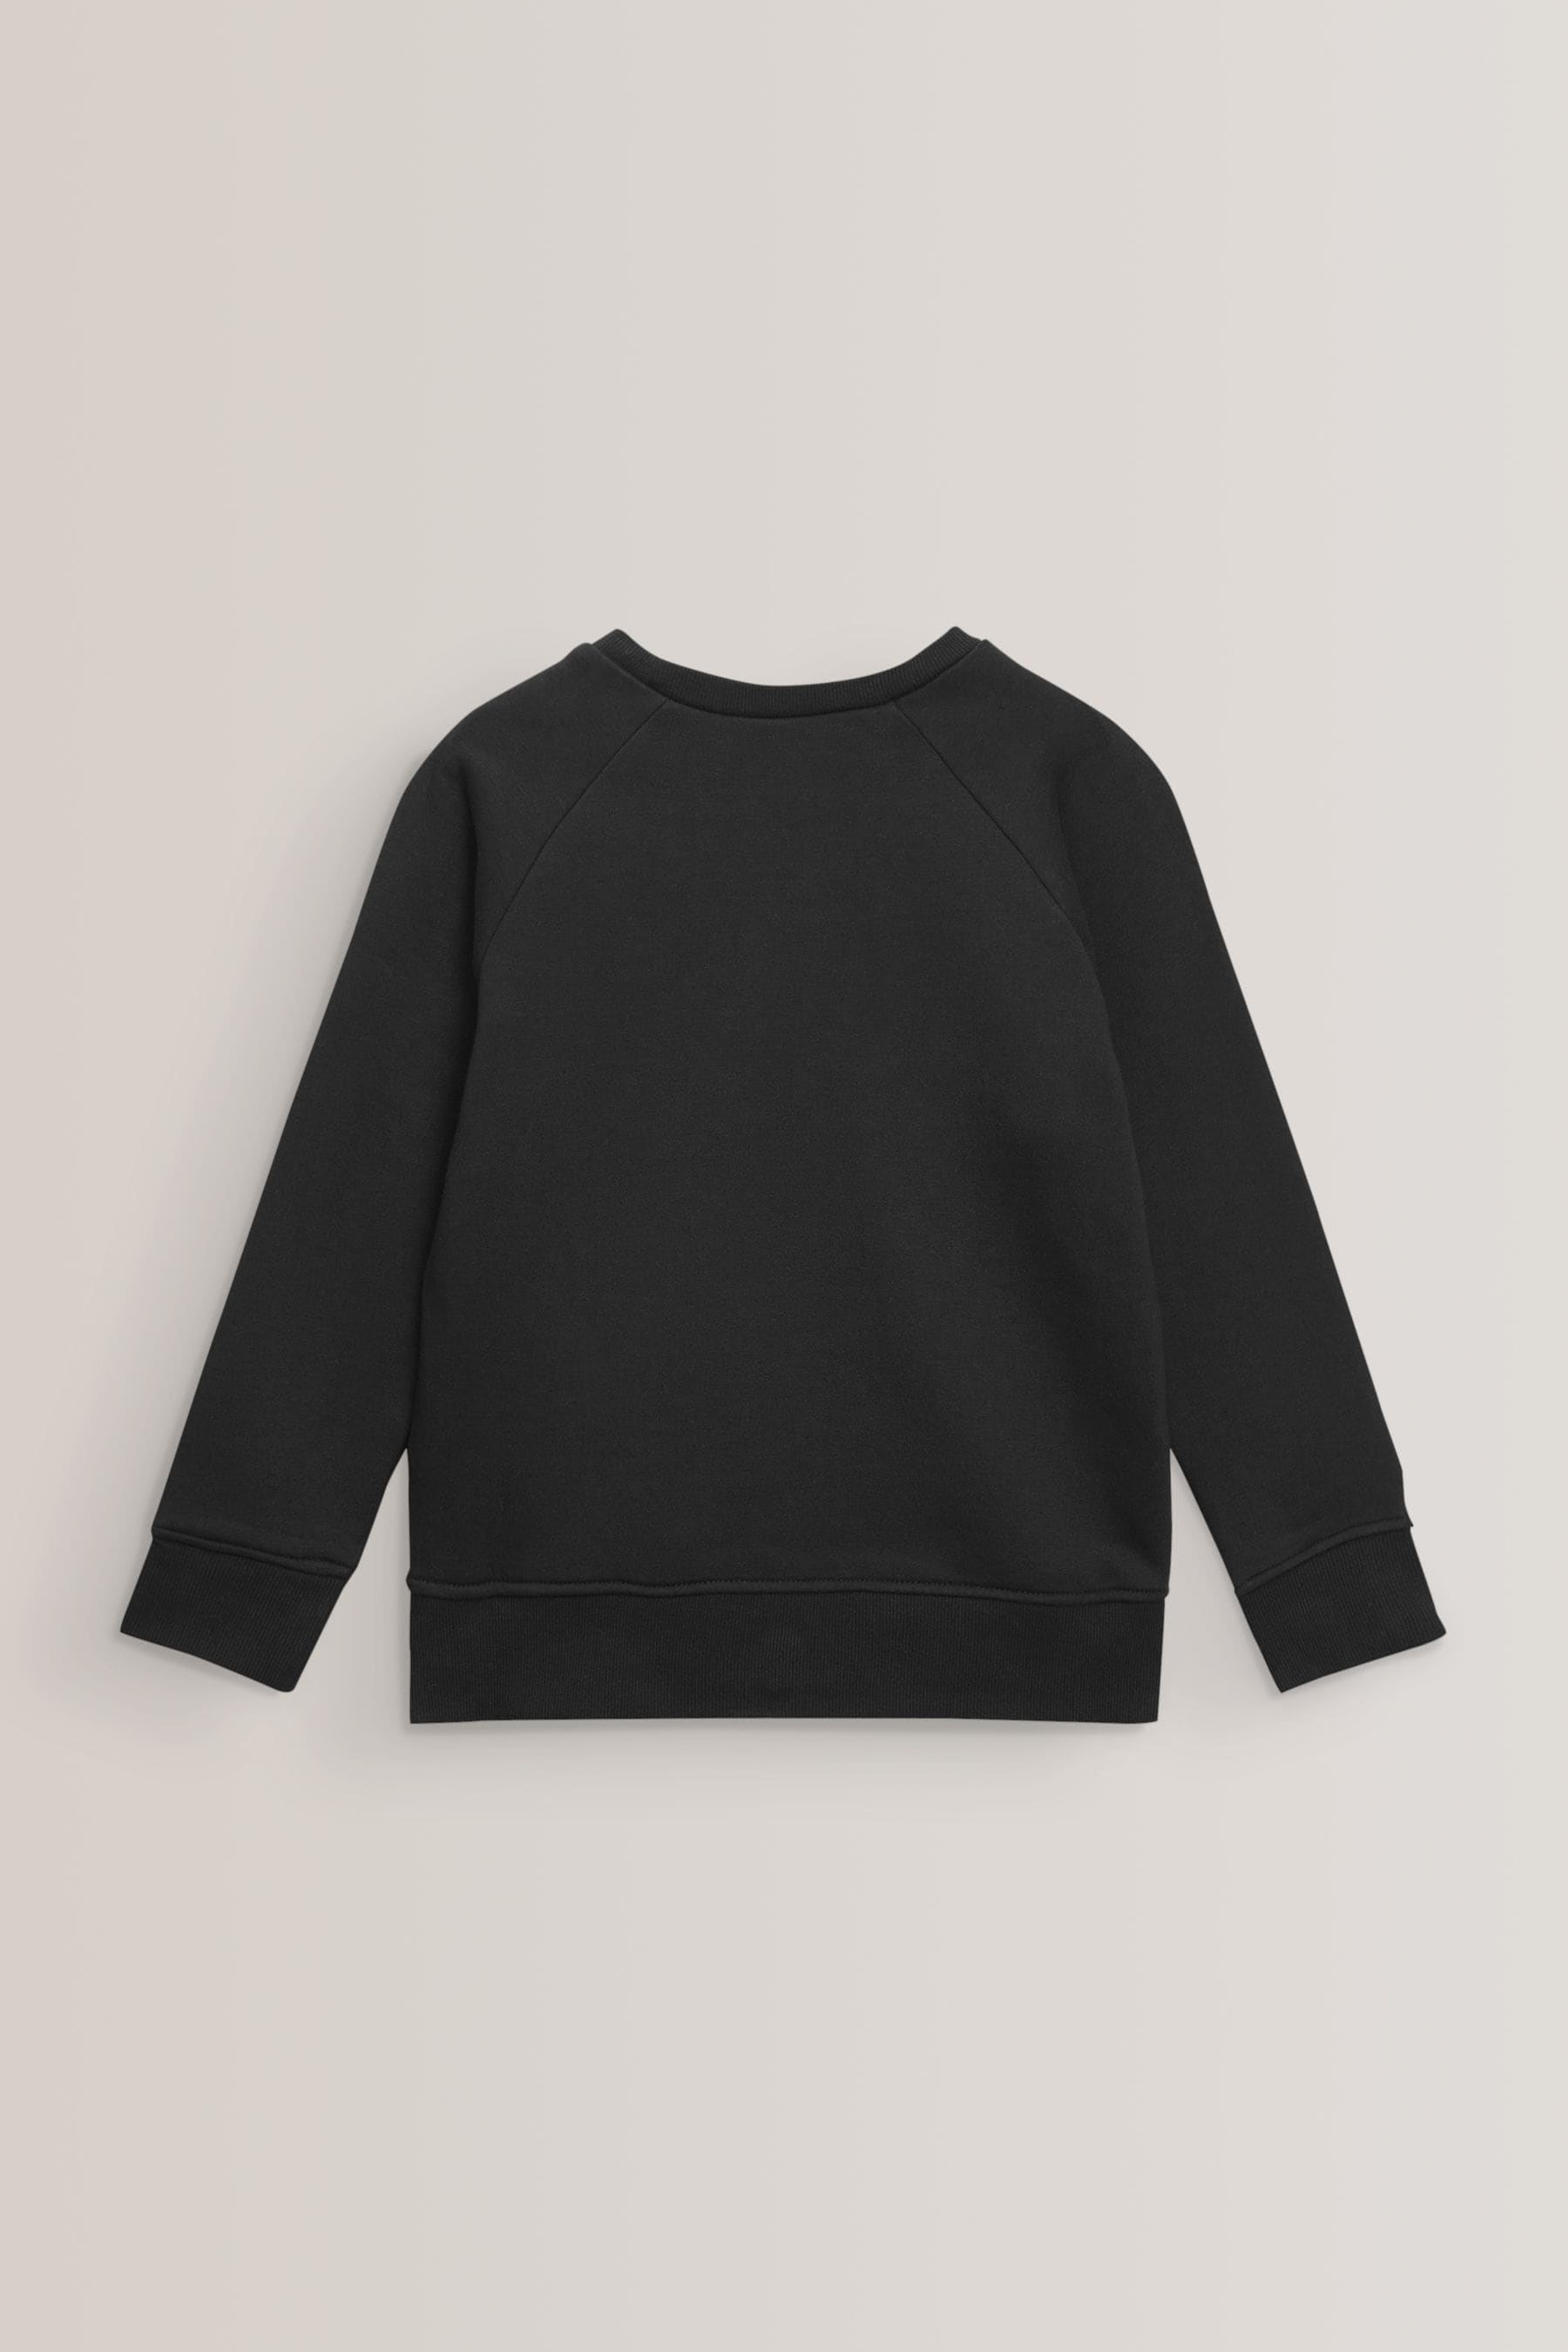 Buy Black 1 Pack Crew Neck School Sweater (3-17yrs) from the Next UK ...